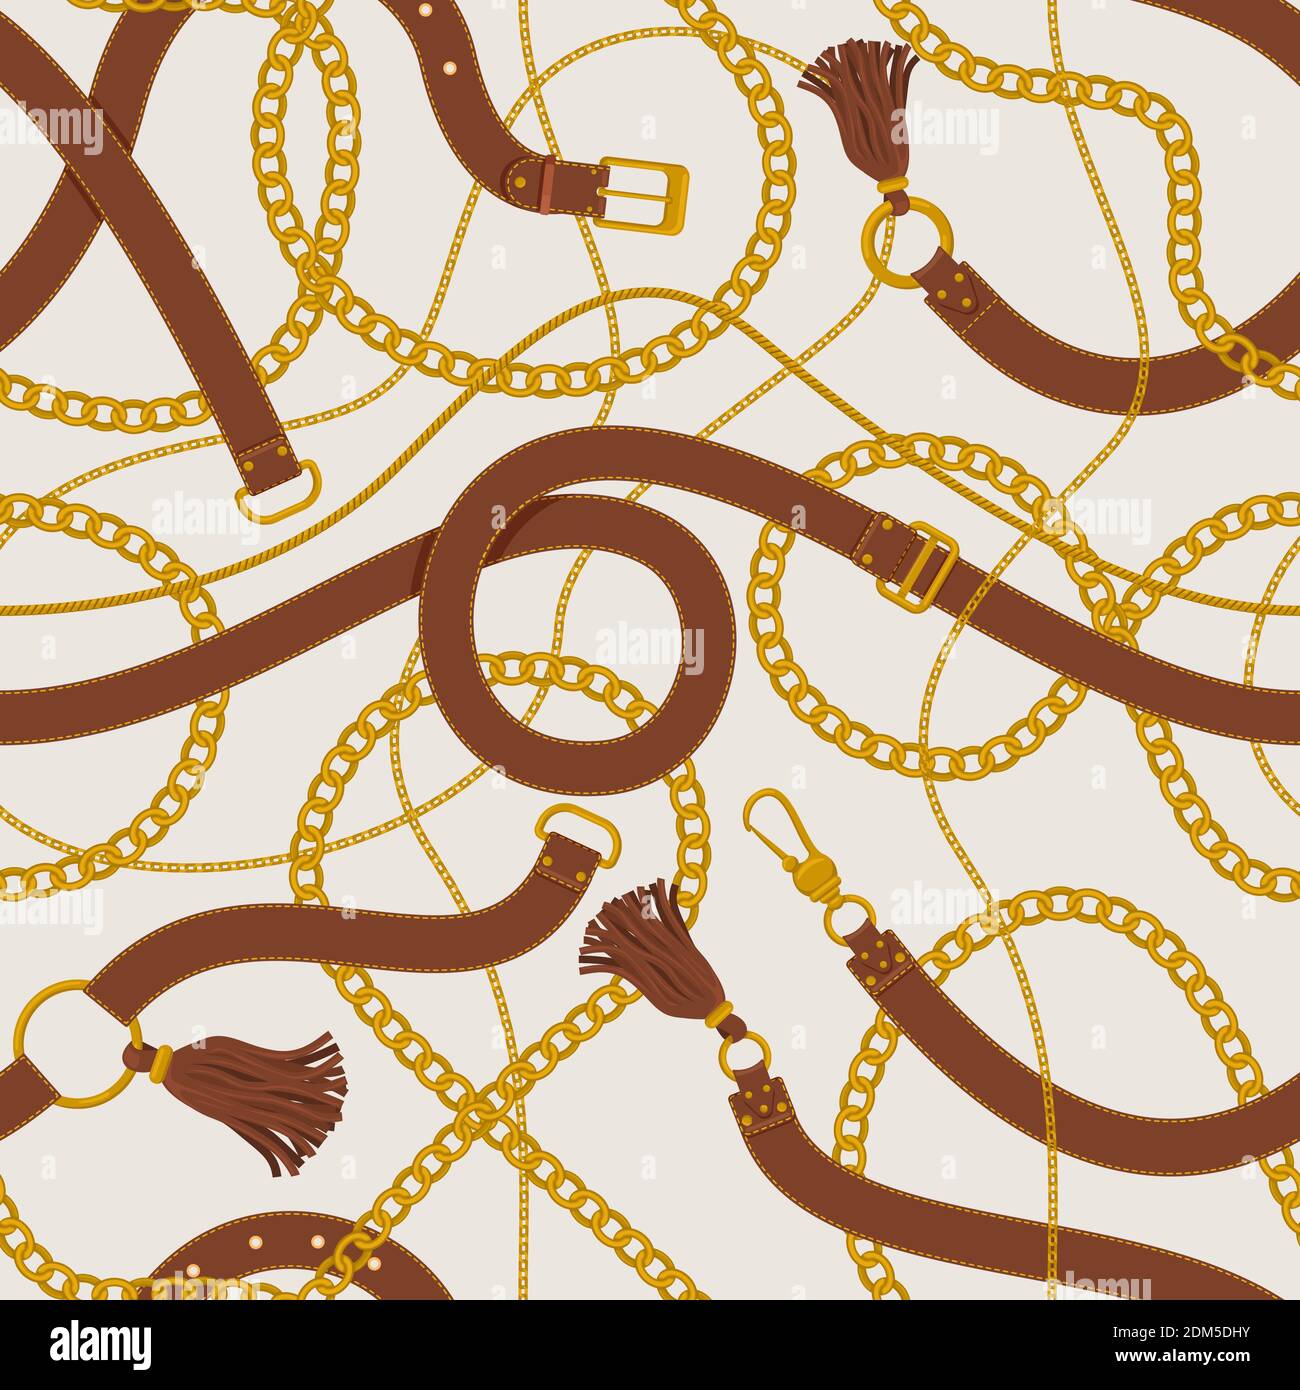 Chains and belts pattern. Leather belts, tassels, gold ring chains and straps backdrop. Belts and golden chains vector background illustration Stock Vector